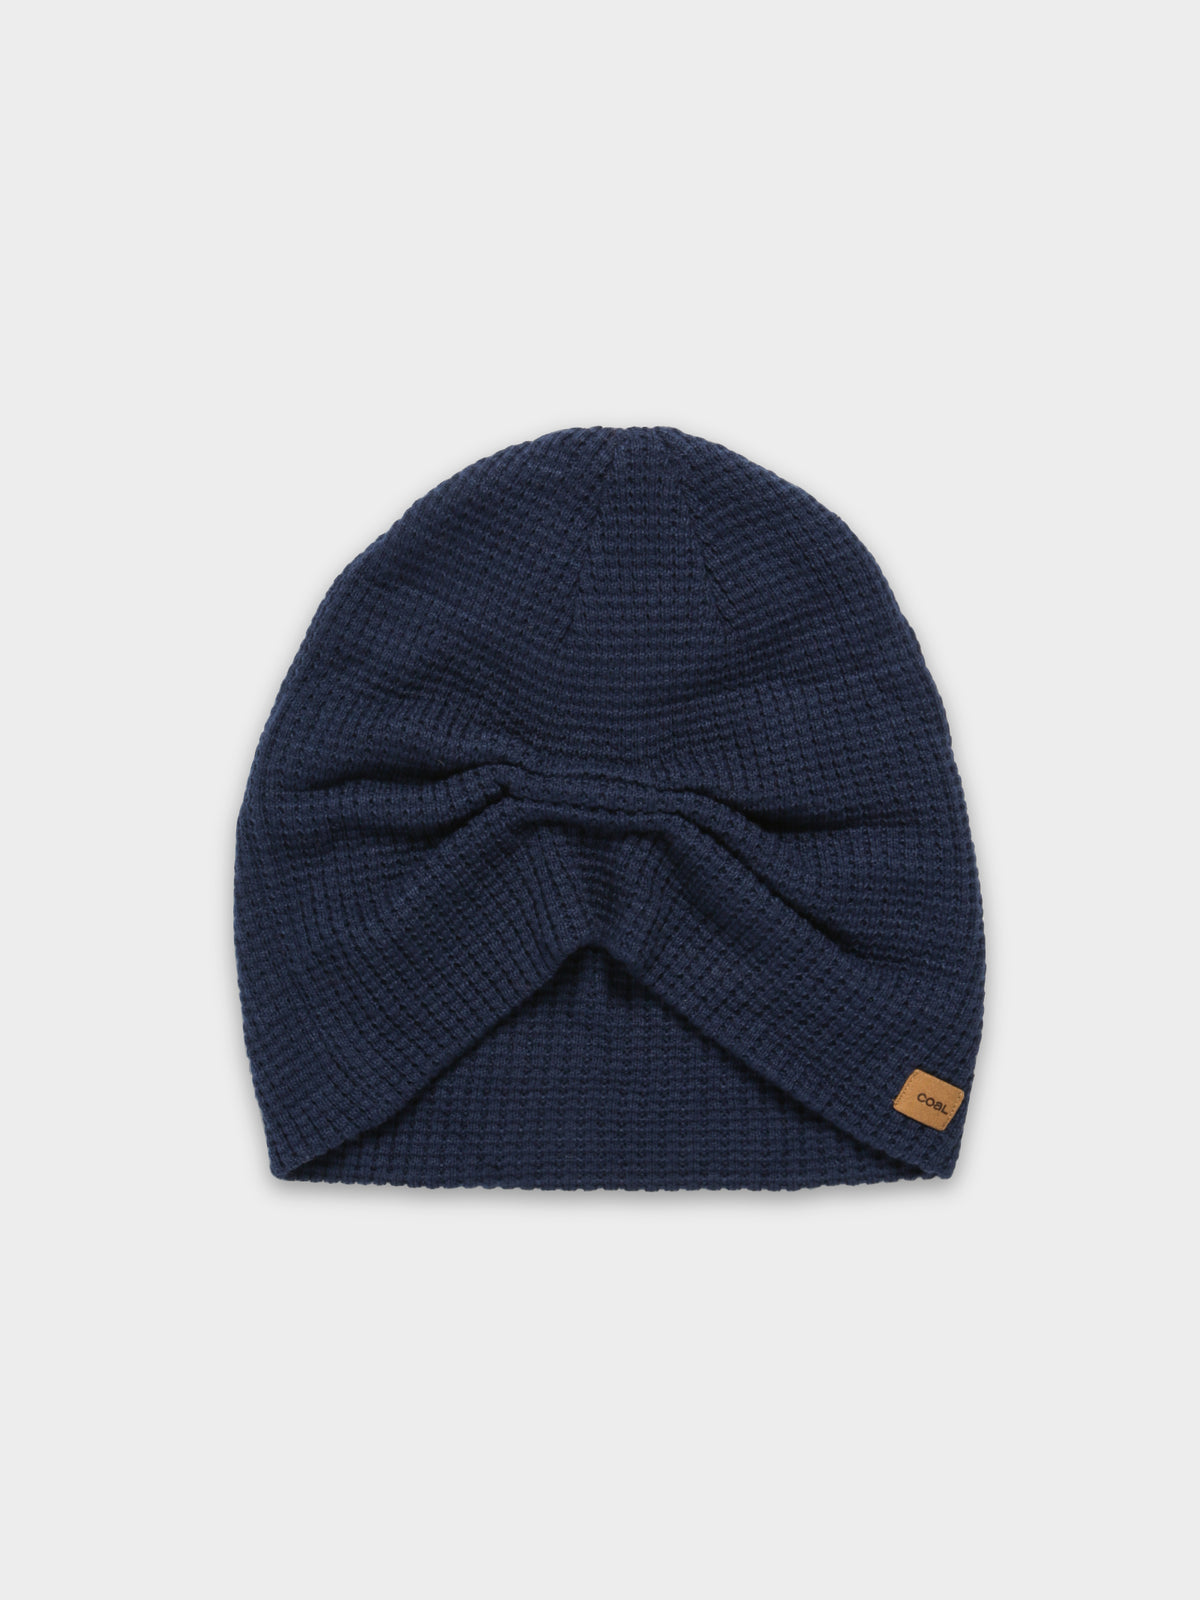 The Soma Beanie in Navy